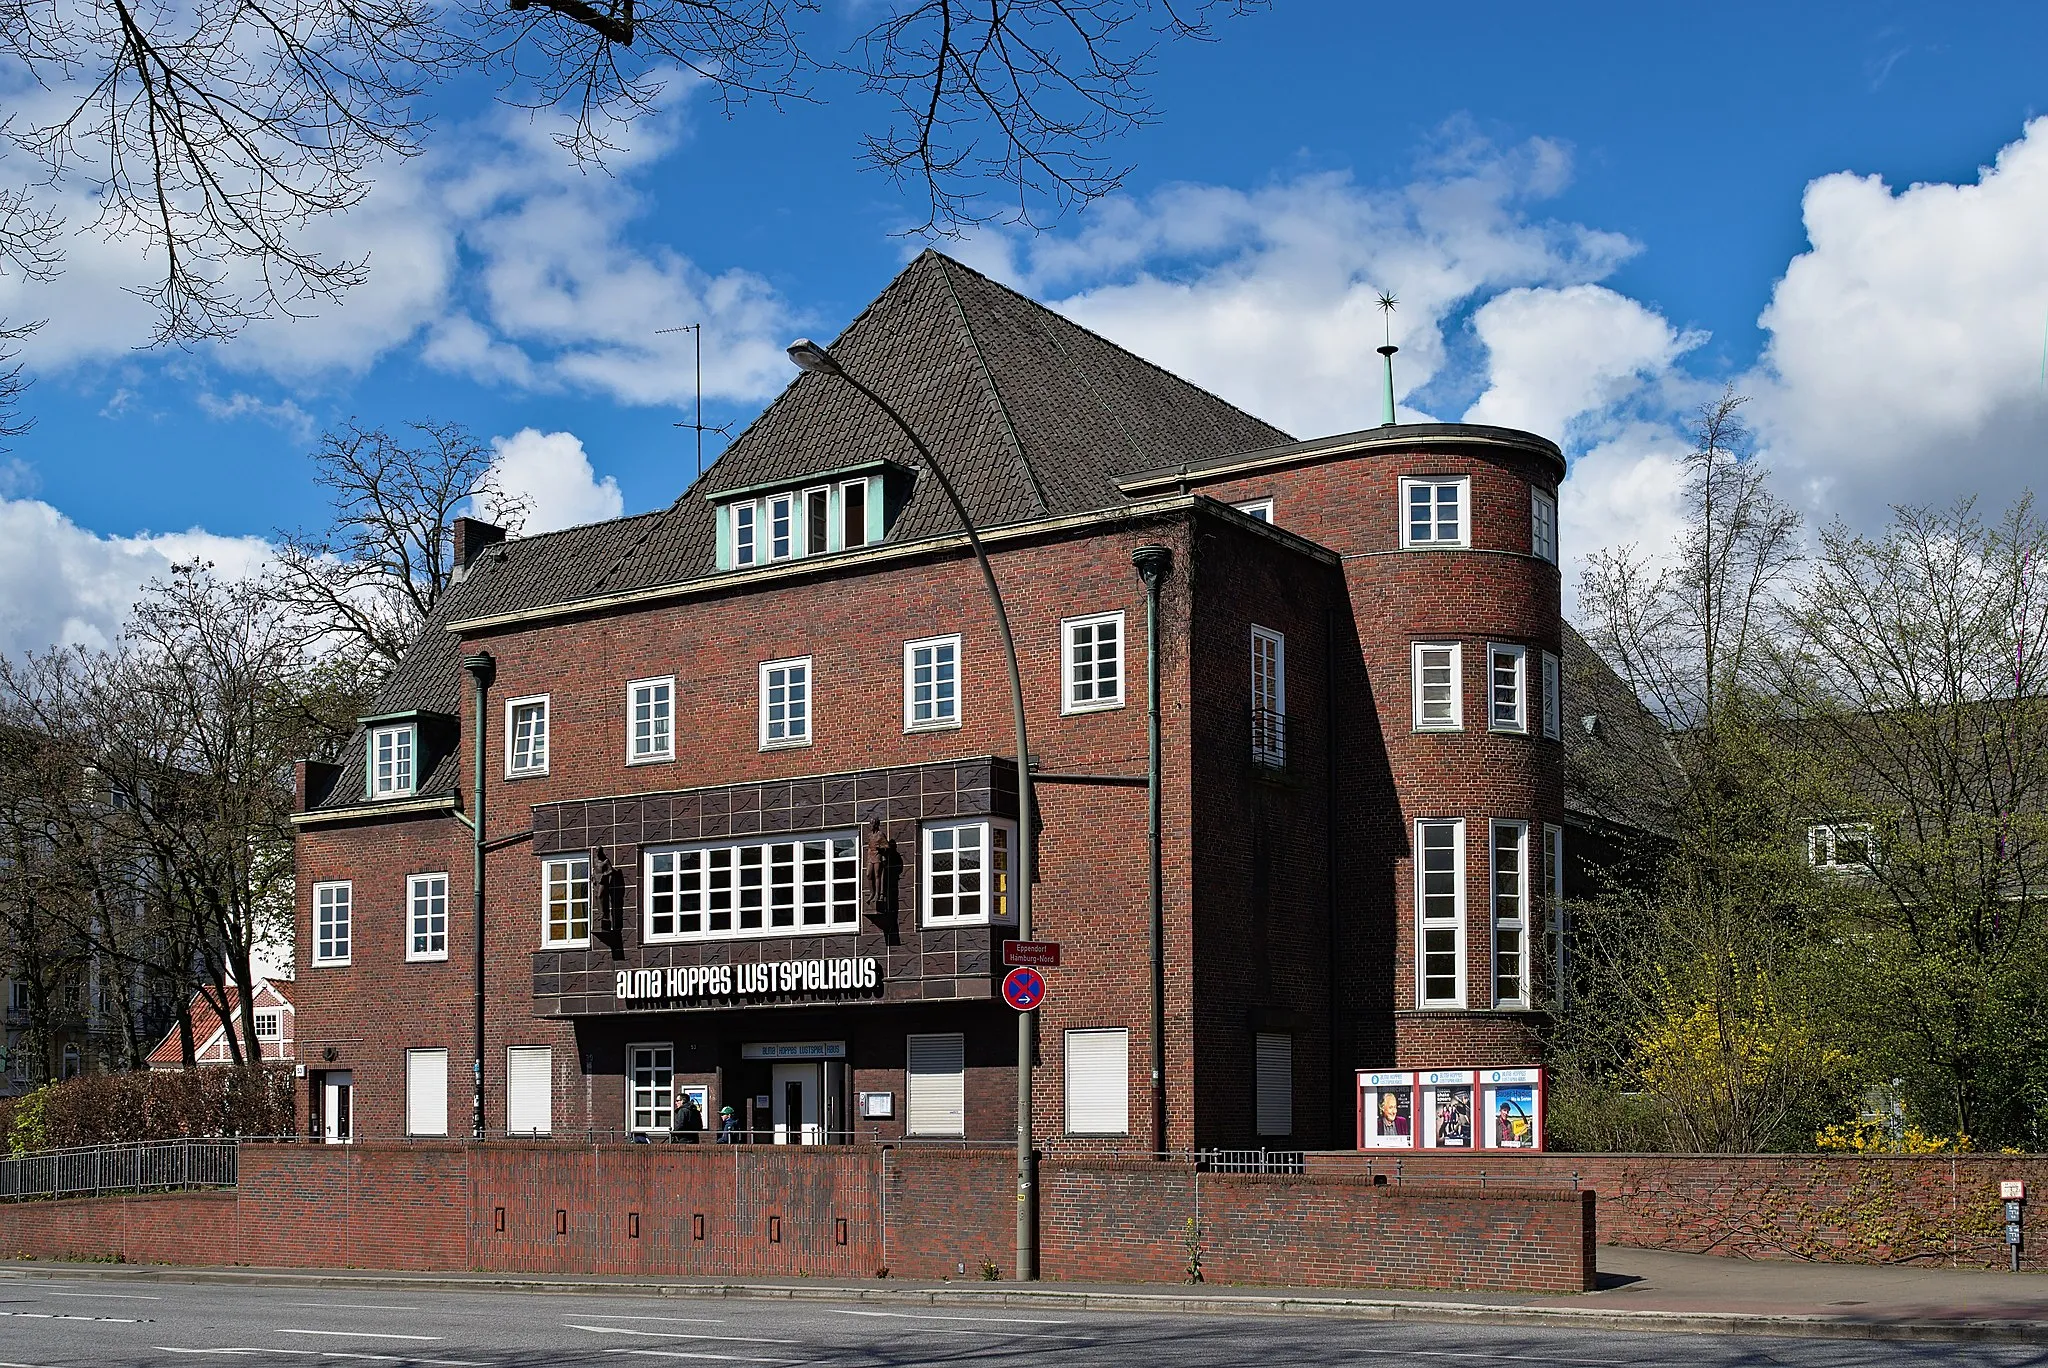 Photo showing: Former congregation hall of St. Johannis church on Ludolfstraße 53 in Hamburg-Eppendorf, completed in 1928. It now houses a cabaret theatre called “Alma Hoppes Lustspielhaus.”